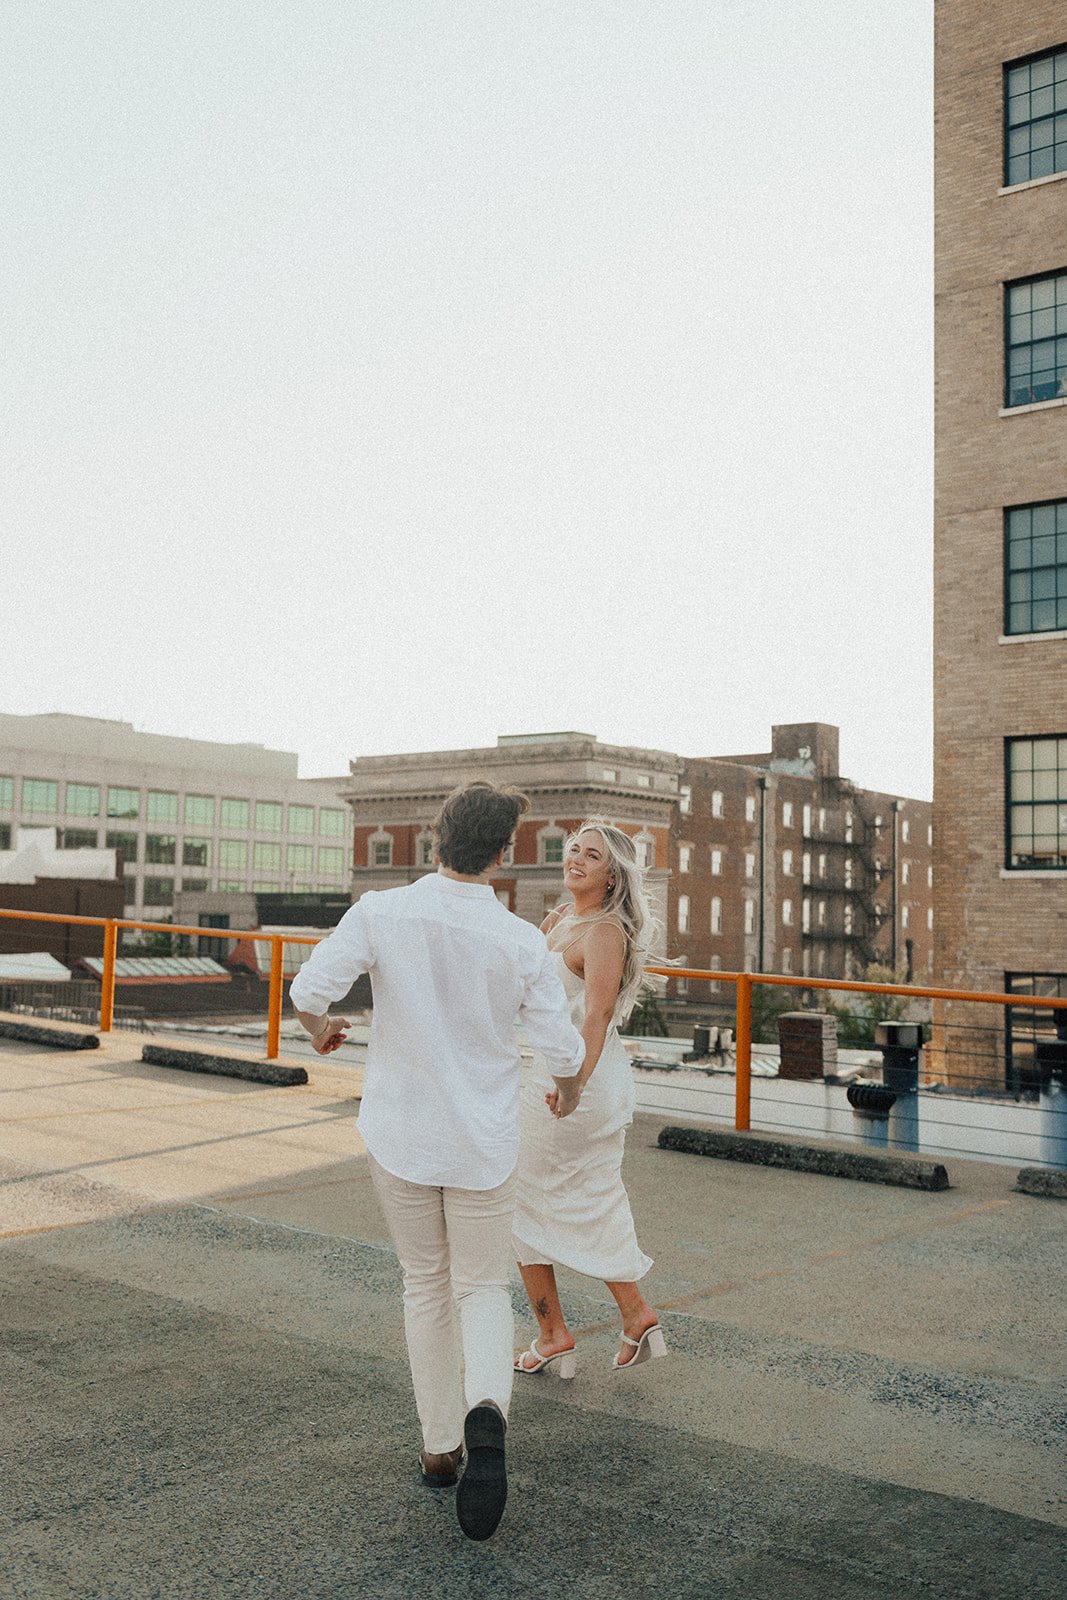 hannah-and-trey-parking-can-be-fun-downtown-memphis-river-walk-mississippi-beach-tennessee-wedding-photographer-jo-darling-photography-143.jpg